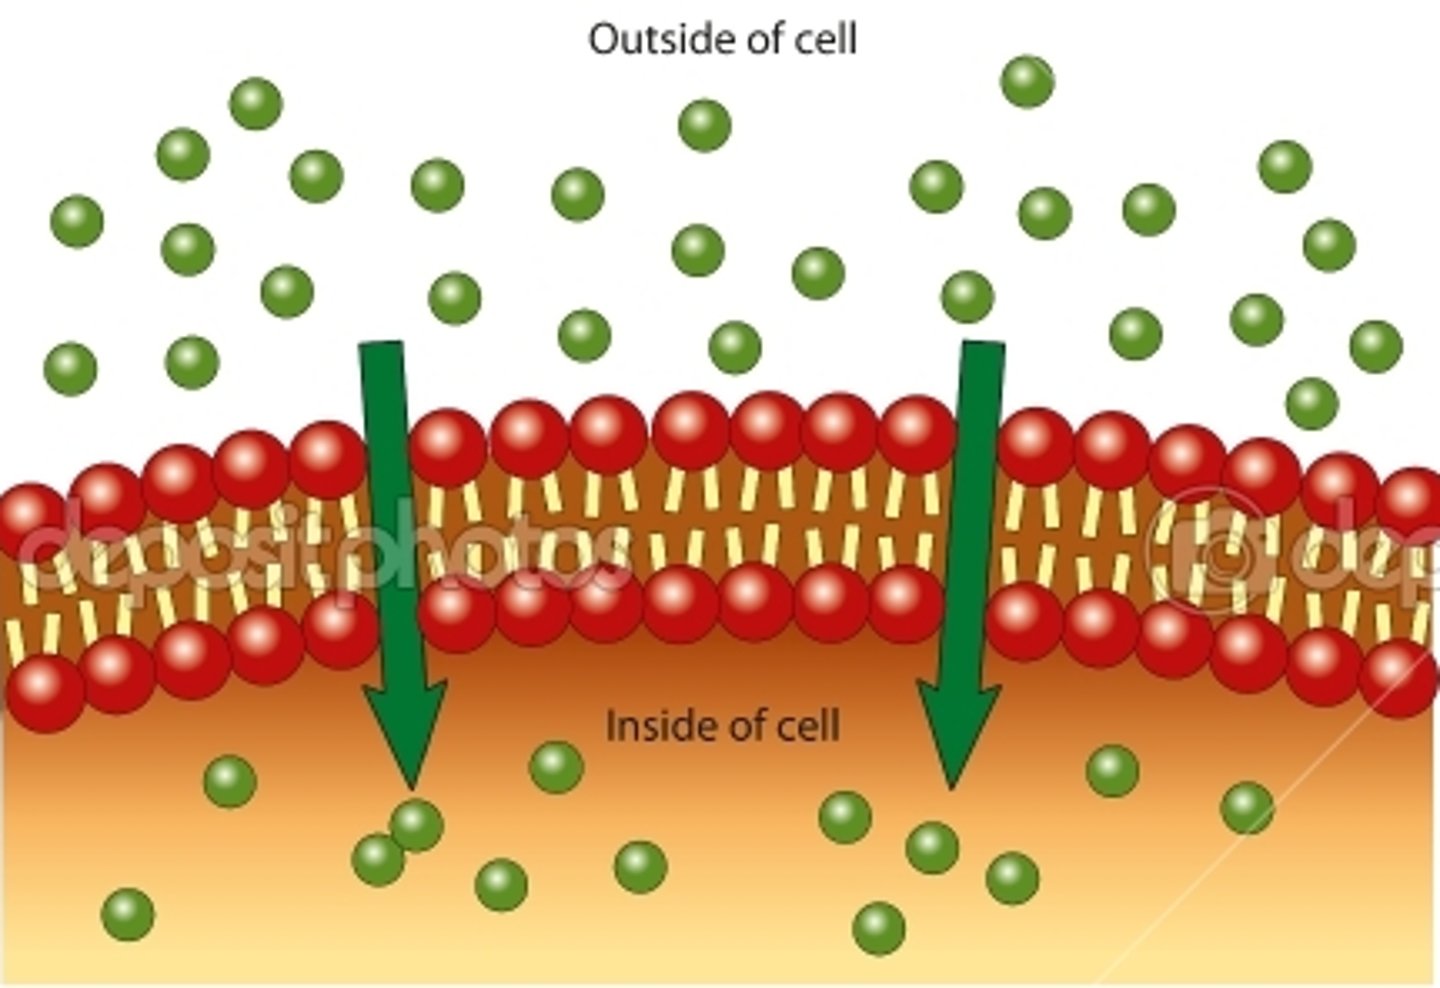 <p>Doesn't require energy, depends on concertation gradient <br>Direct transport of molecules across the cell membrane<br>Small uncharged molecules or lipid soluble molecules pass between the phospholipids to enter or leave the cell, moving from areas of high concentration to areas of low concentration</p>